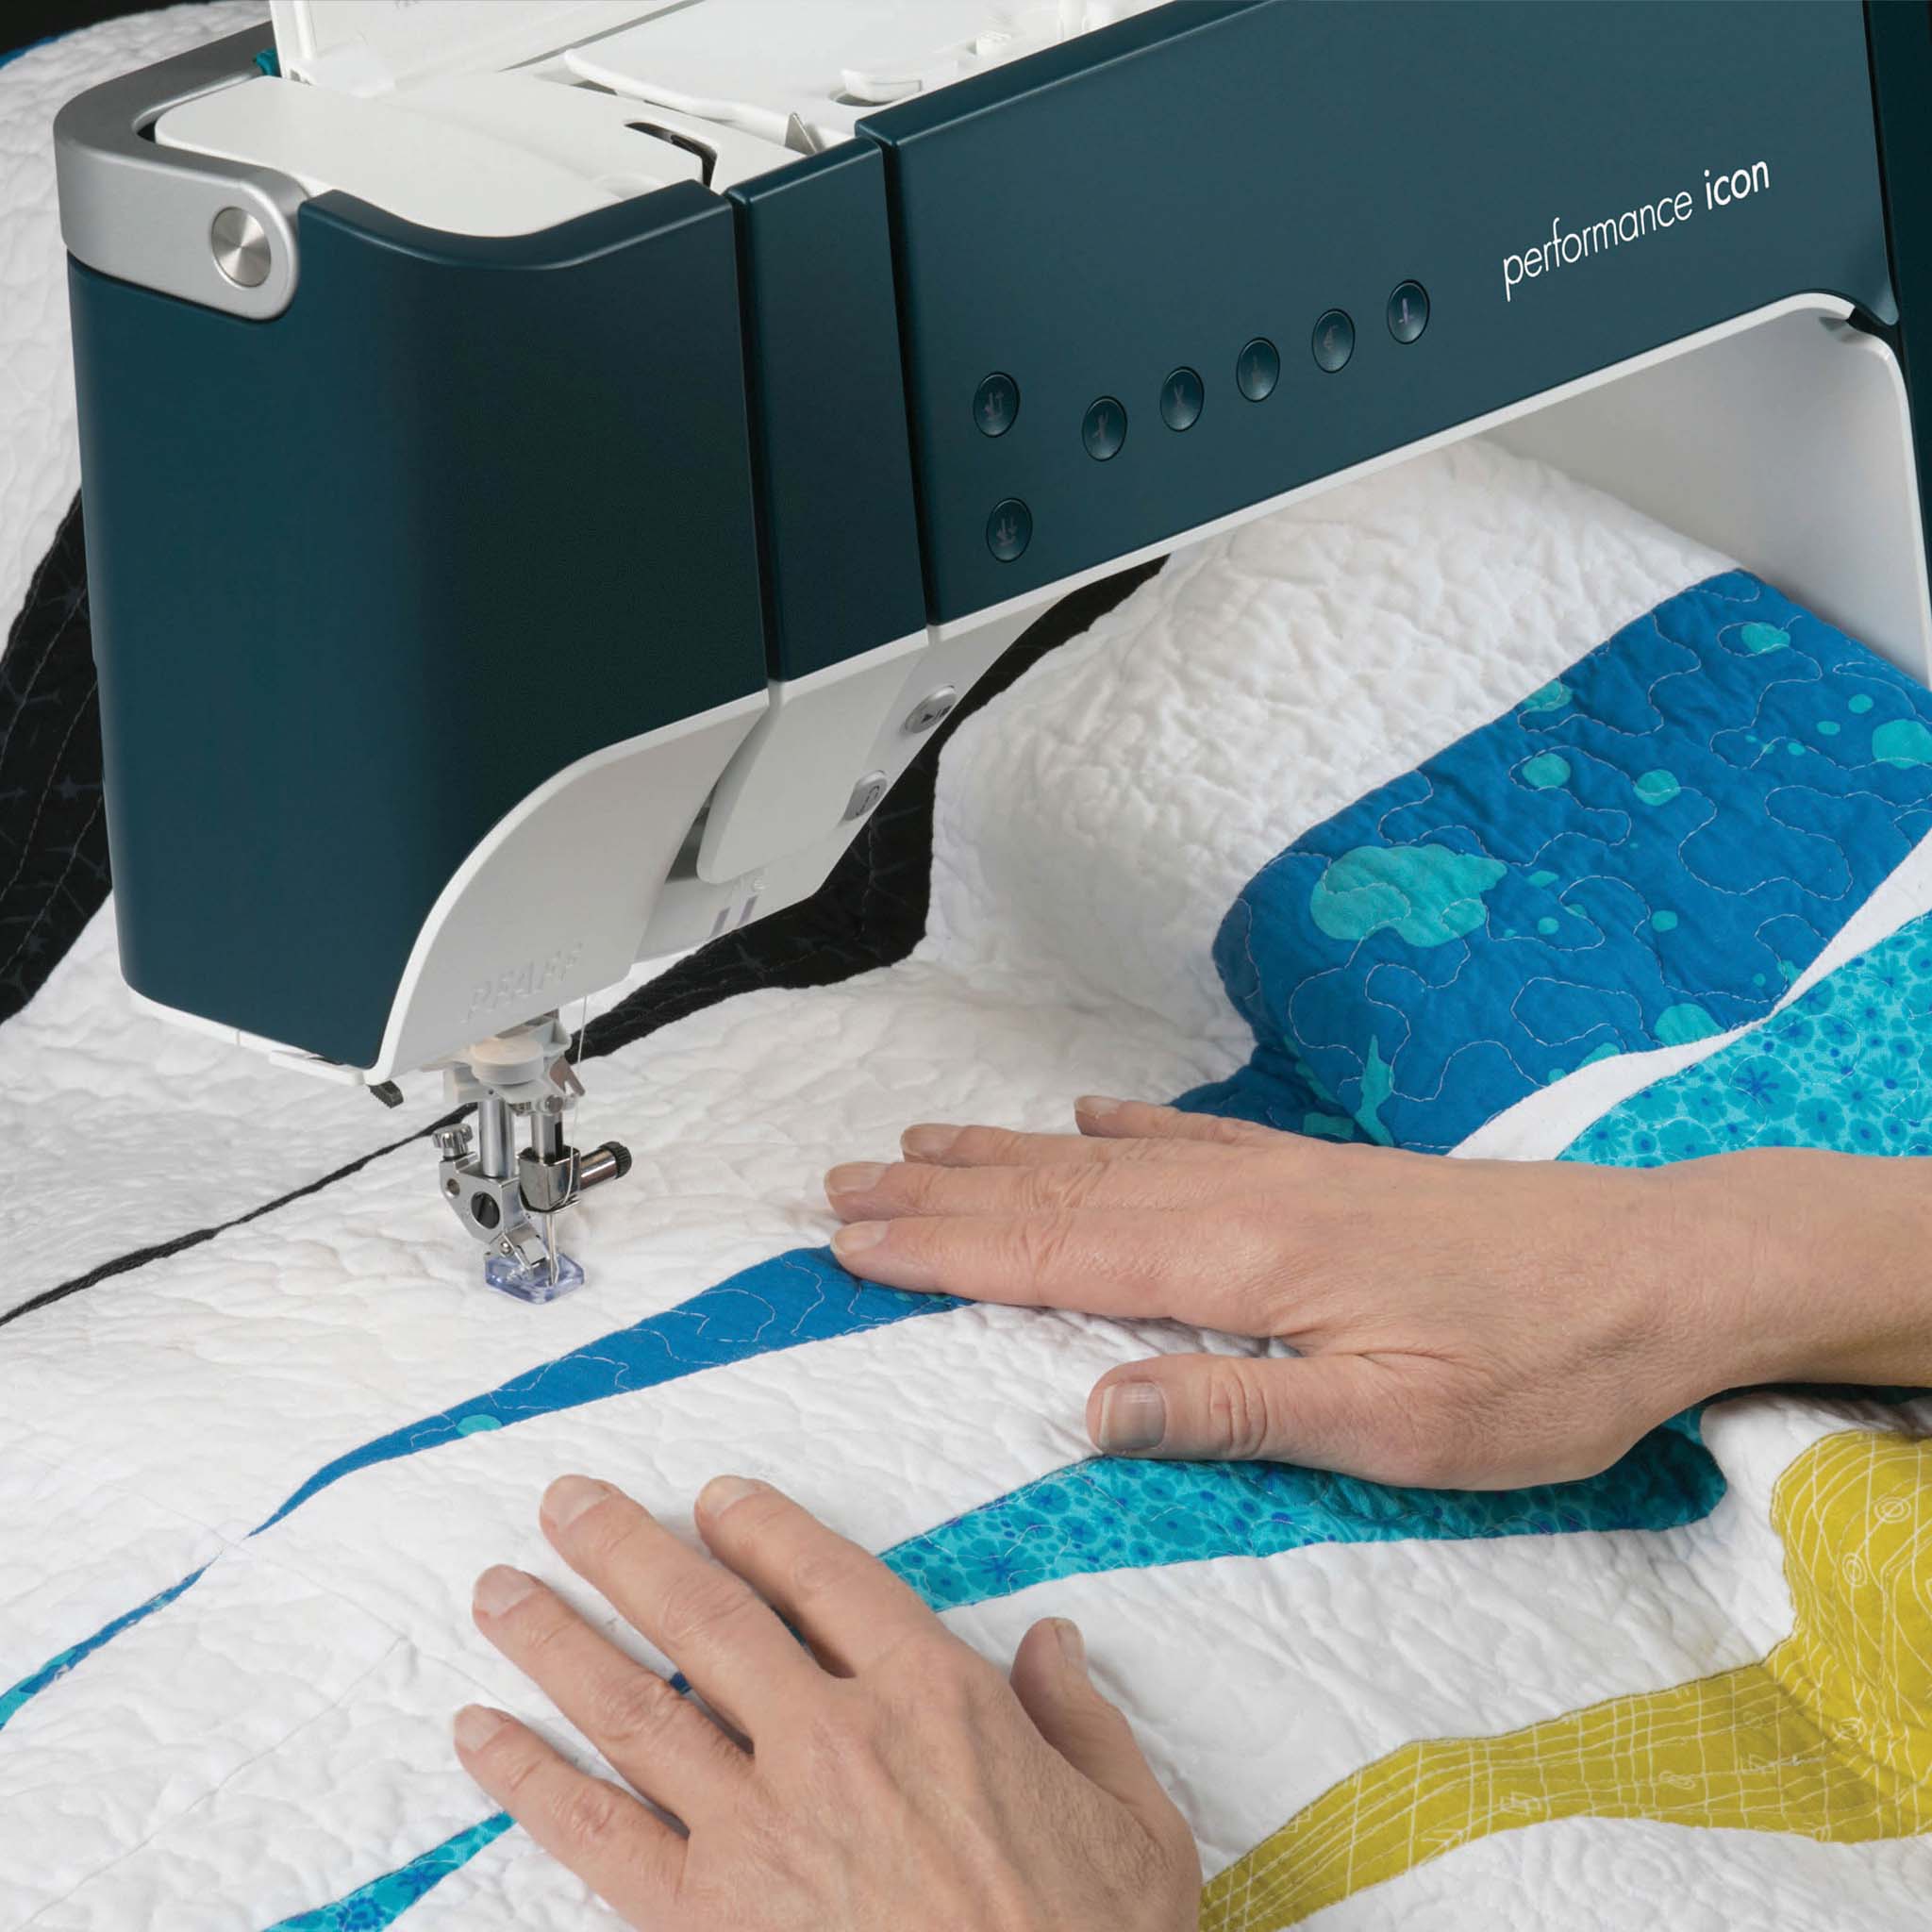 Enjoy stunning results with PFAFF embroidery machines